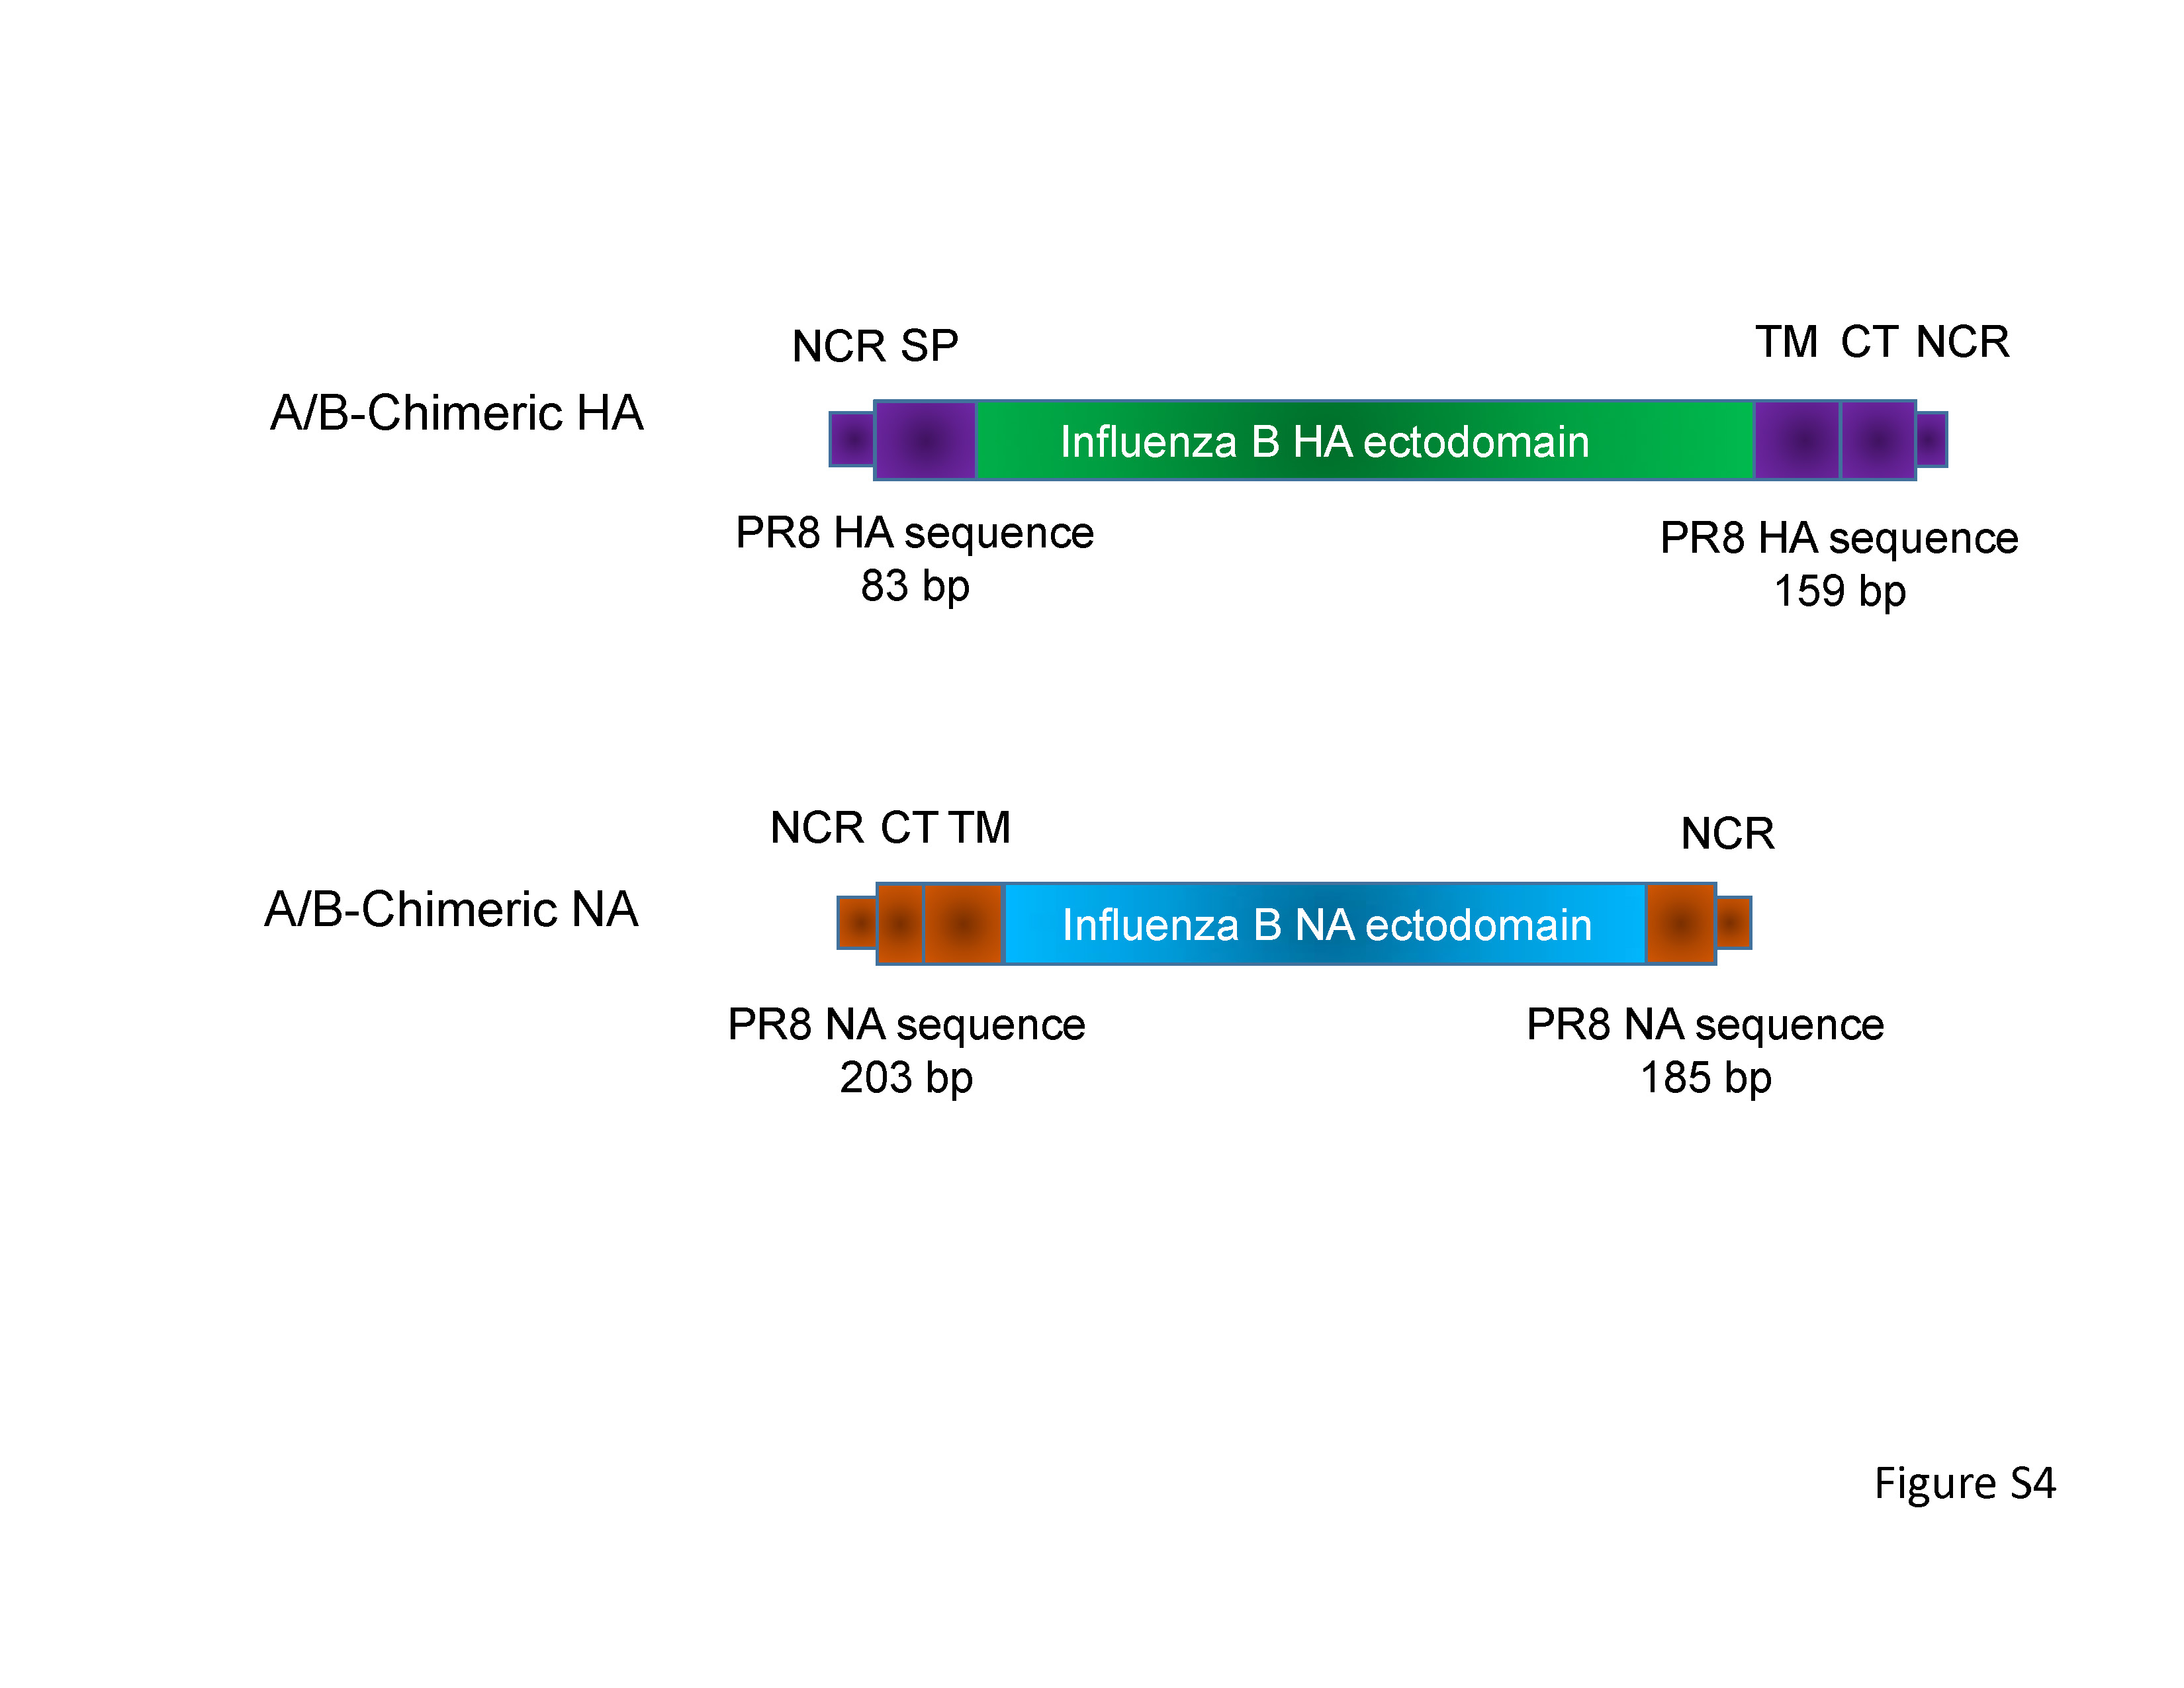 Schematic diagram of chimeric HA and NA genes.